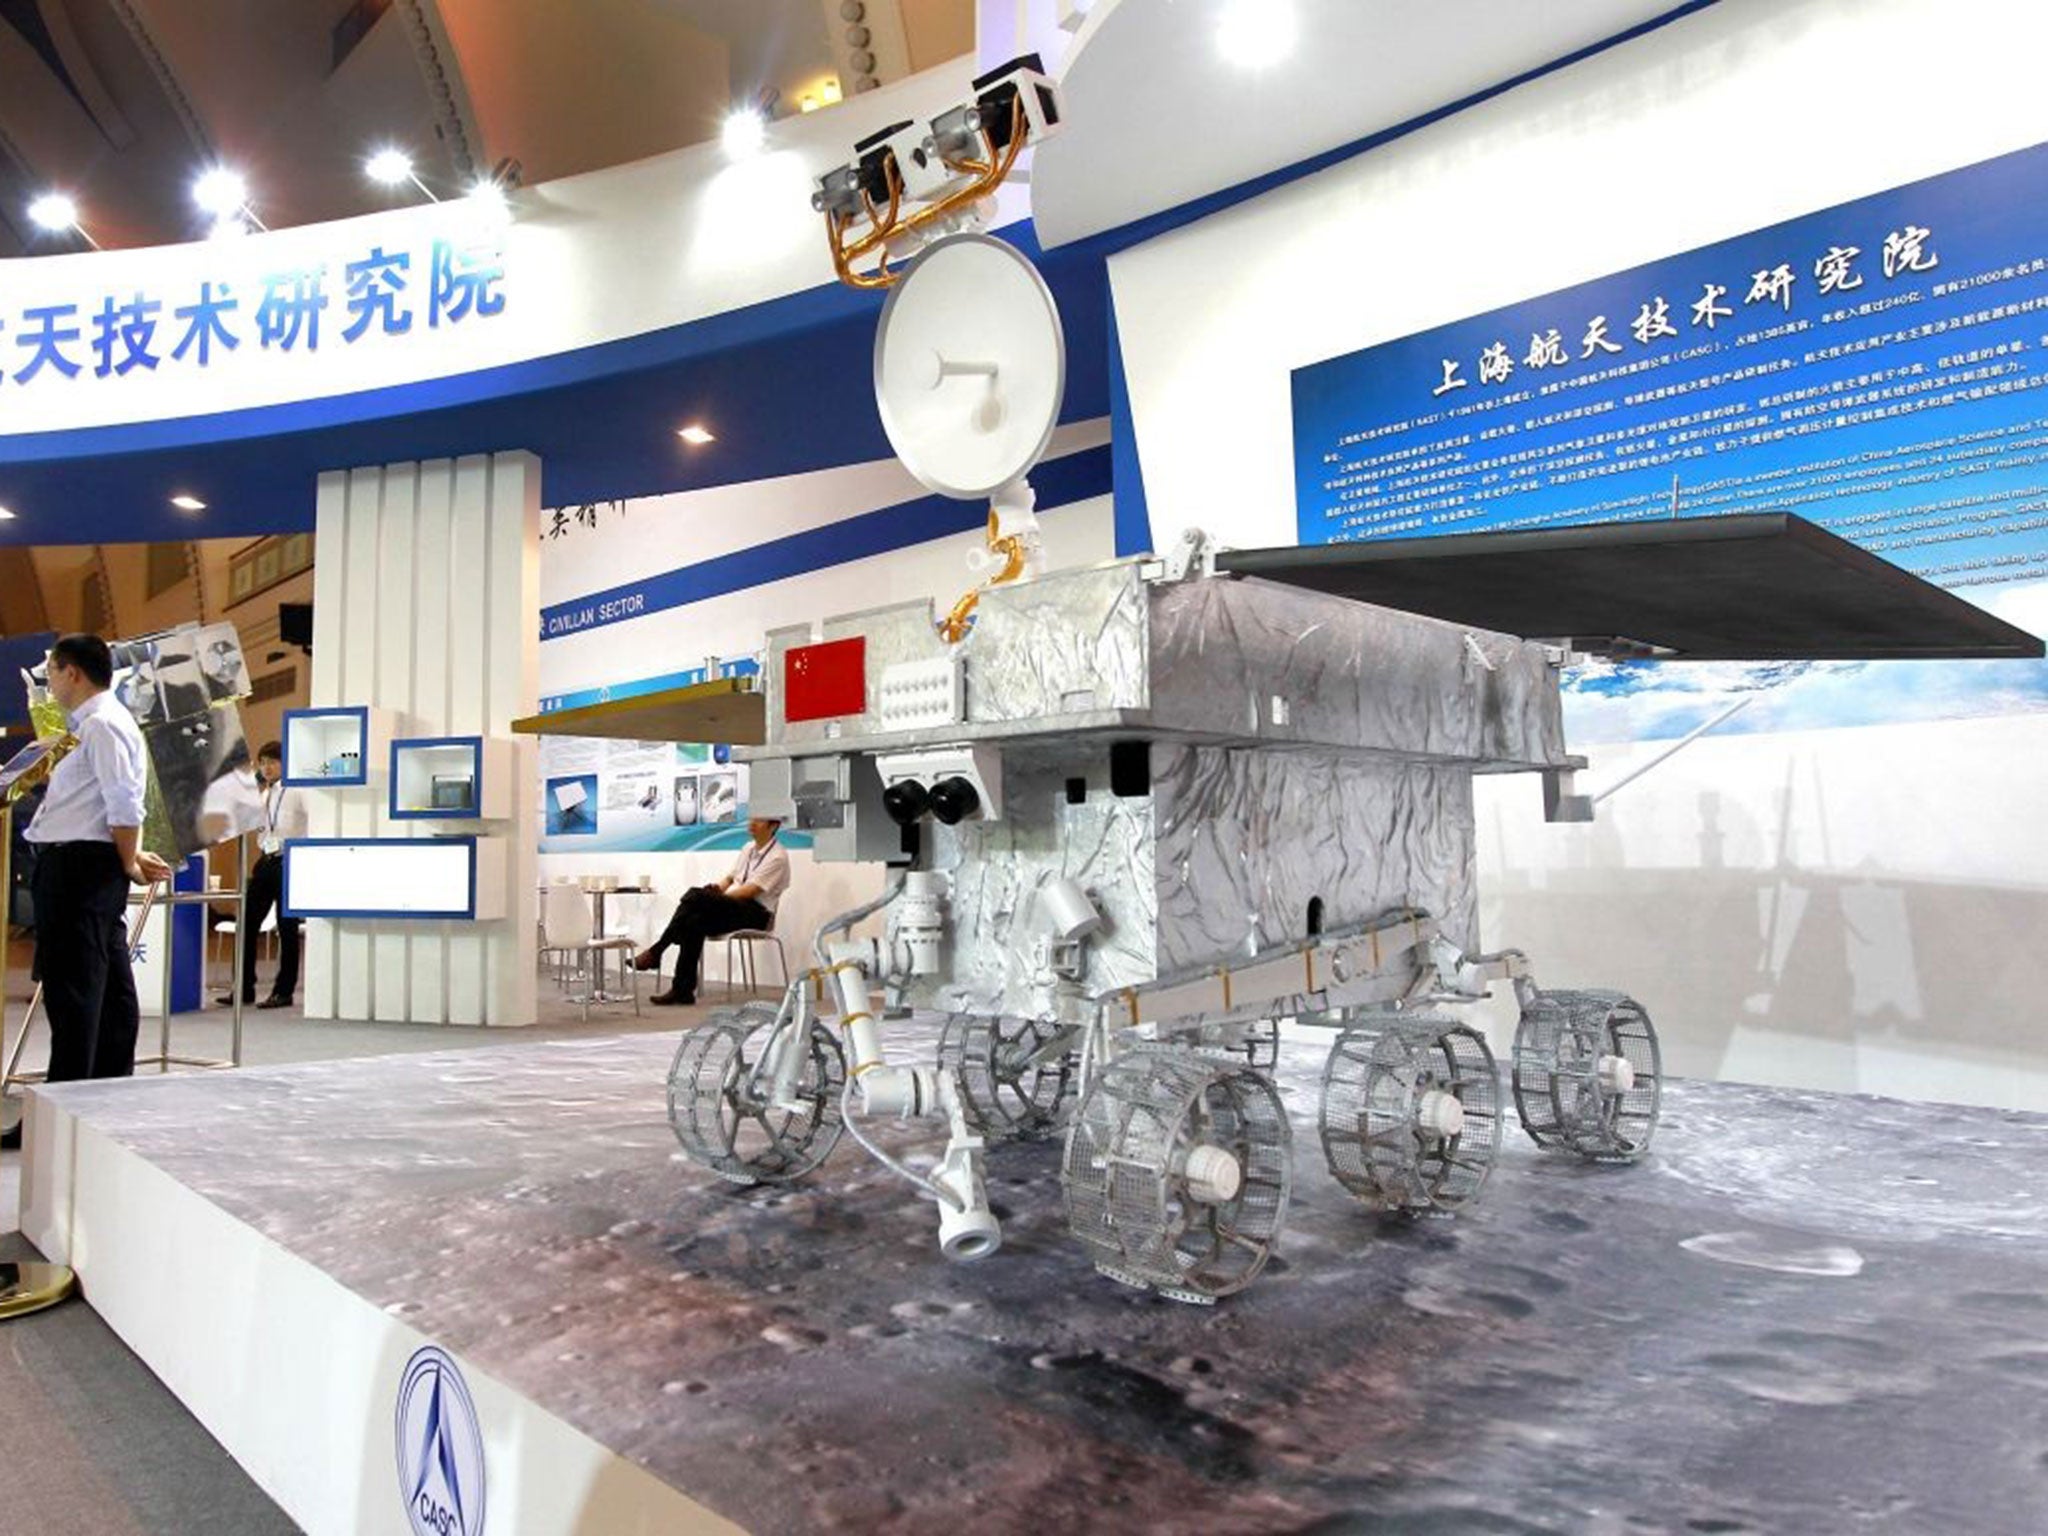 A model of Yutu, China's Moon rover, named after the pet rabbit of Chang'e, the goddess of the Moon in Chinese mythology